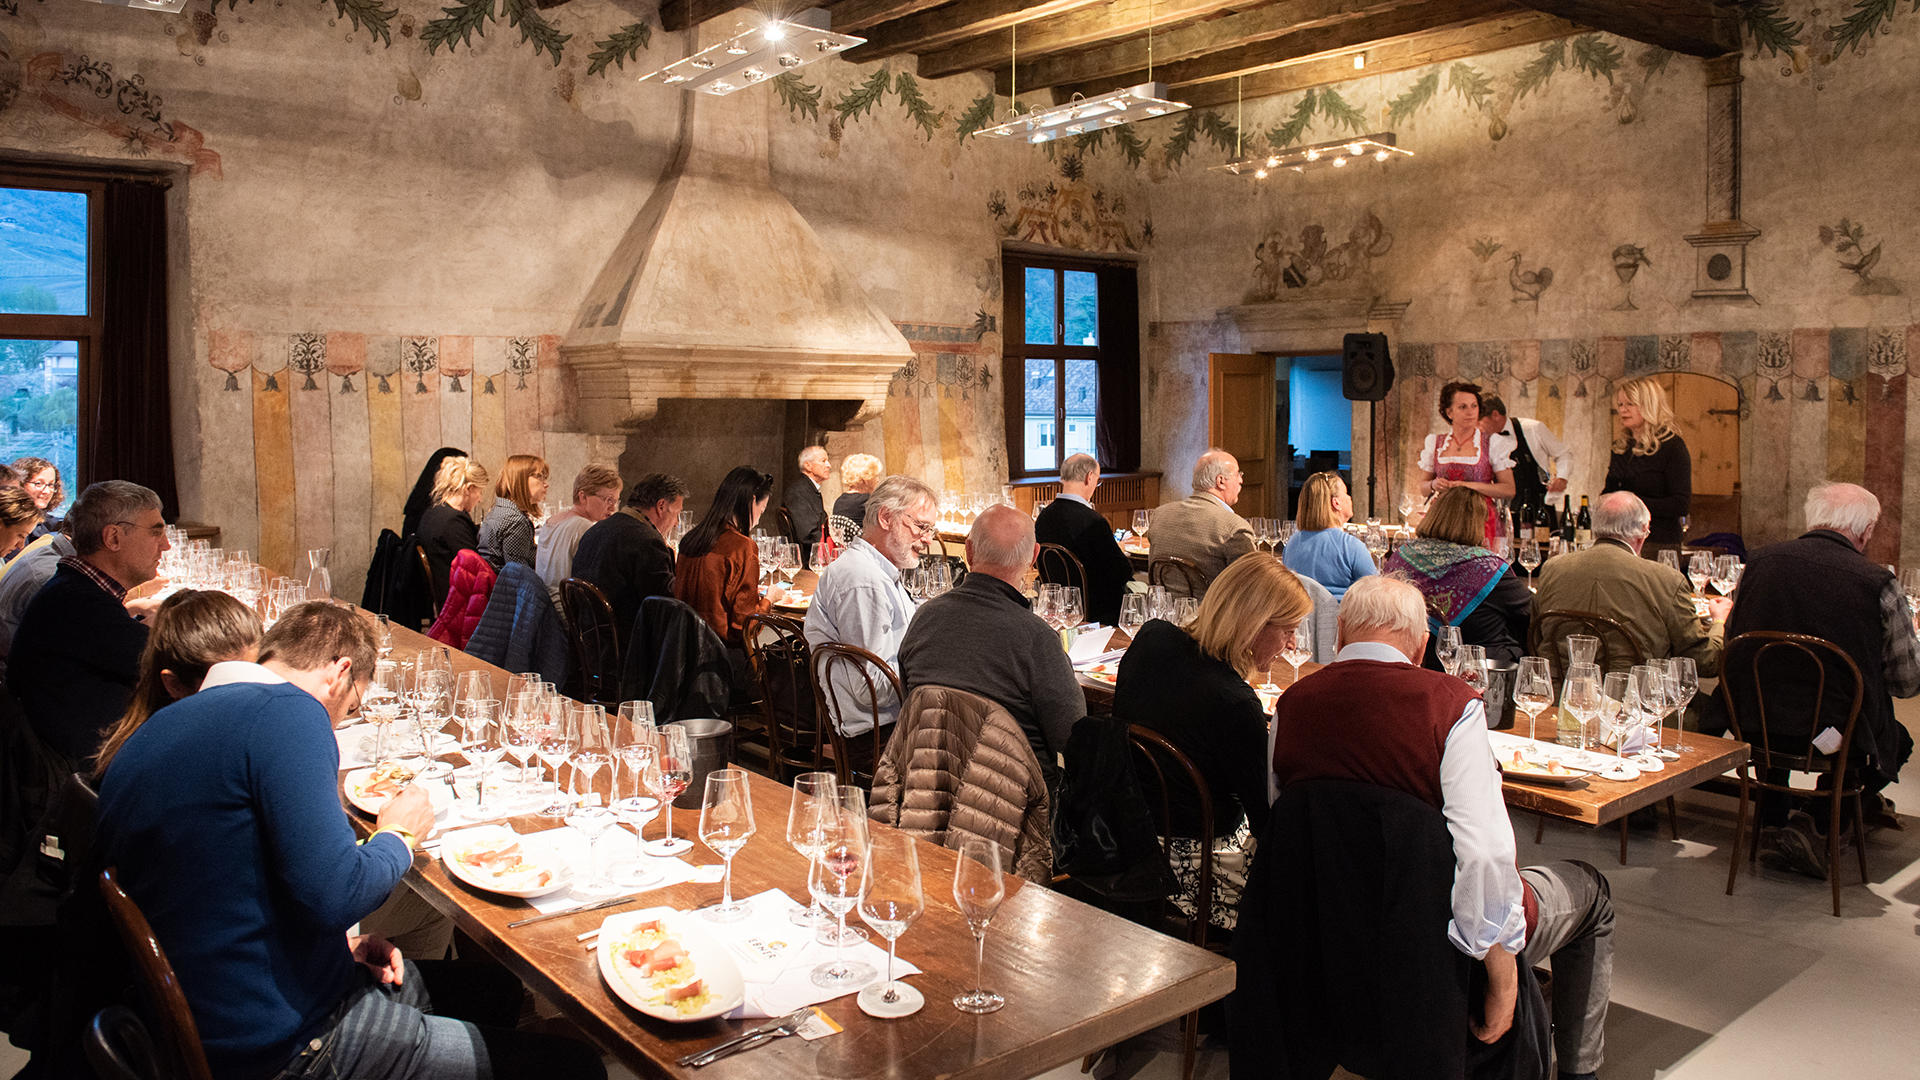 Groups of customers eating in a traditional restaurant in Bolzano are about to see a small show organised by the restaurant owners.